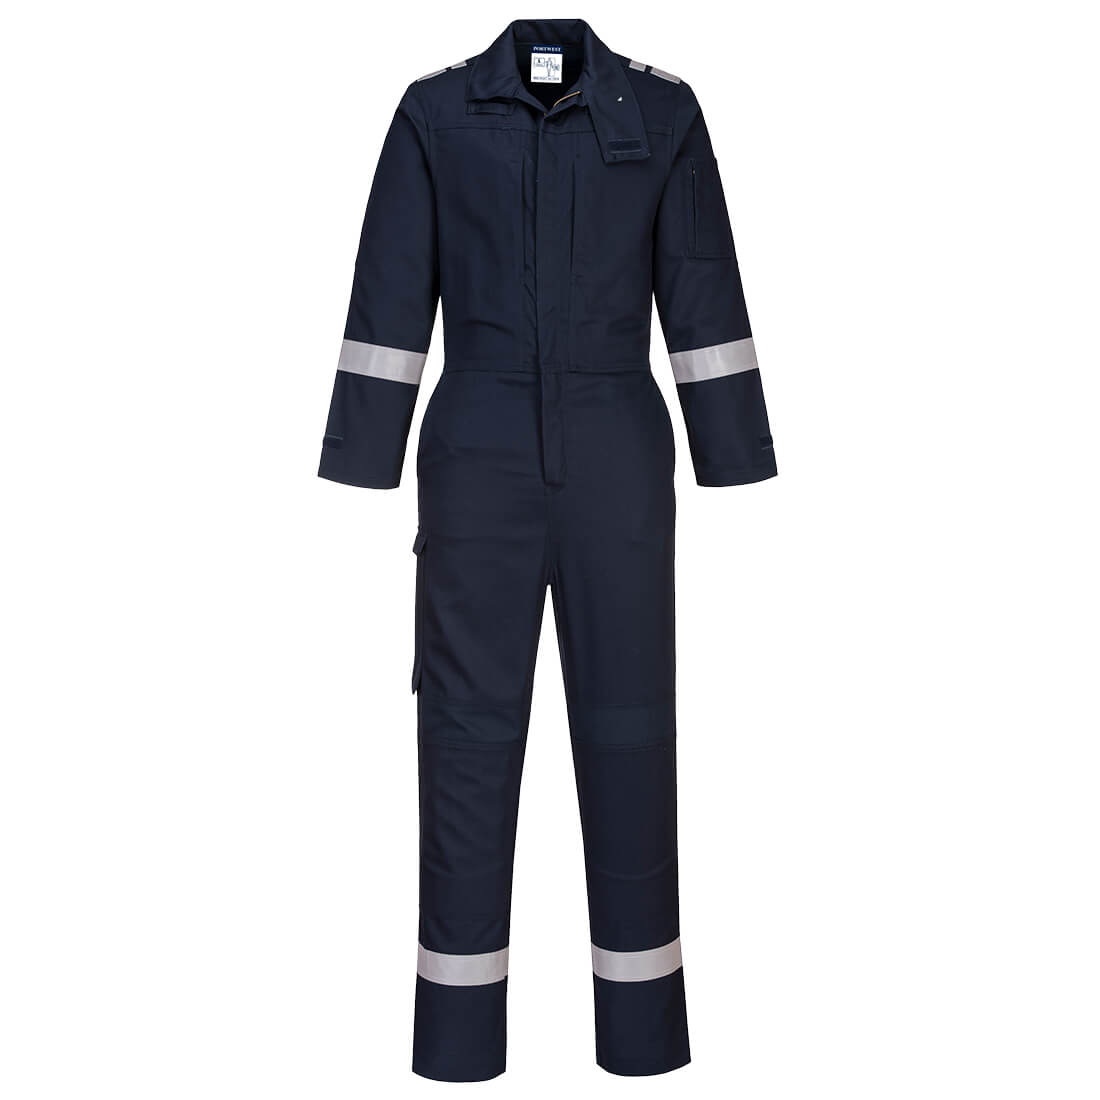 Bizflame Plus Stretch Panelled Coverall - arbeitskleidung-gmbh